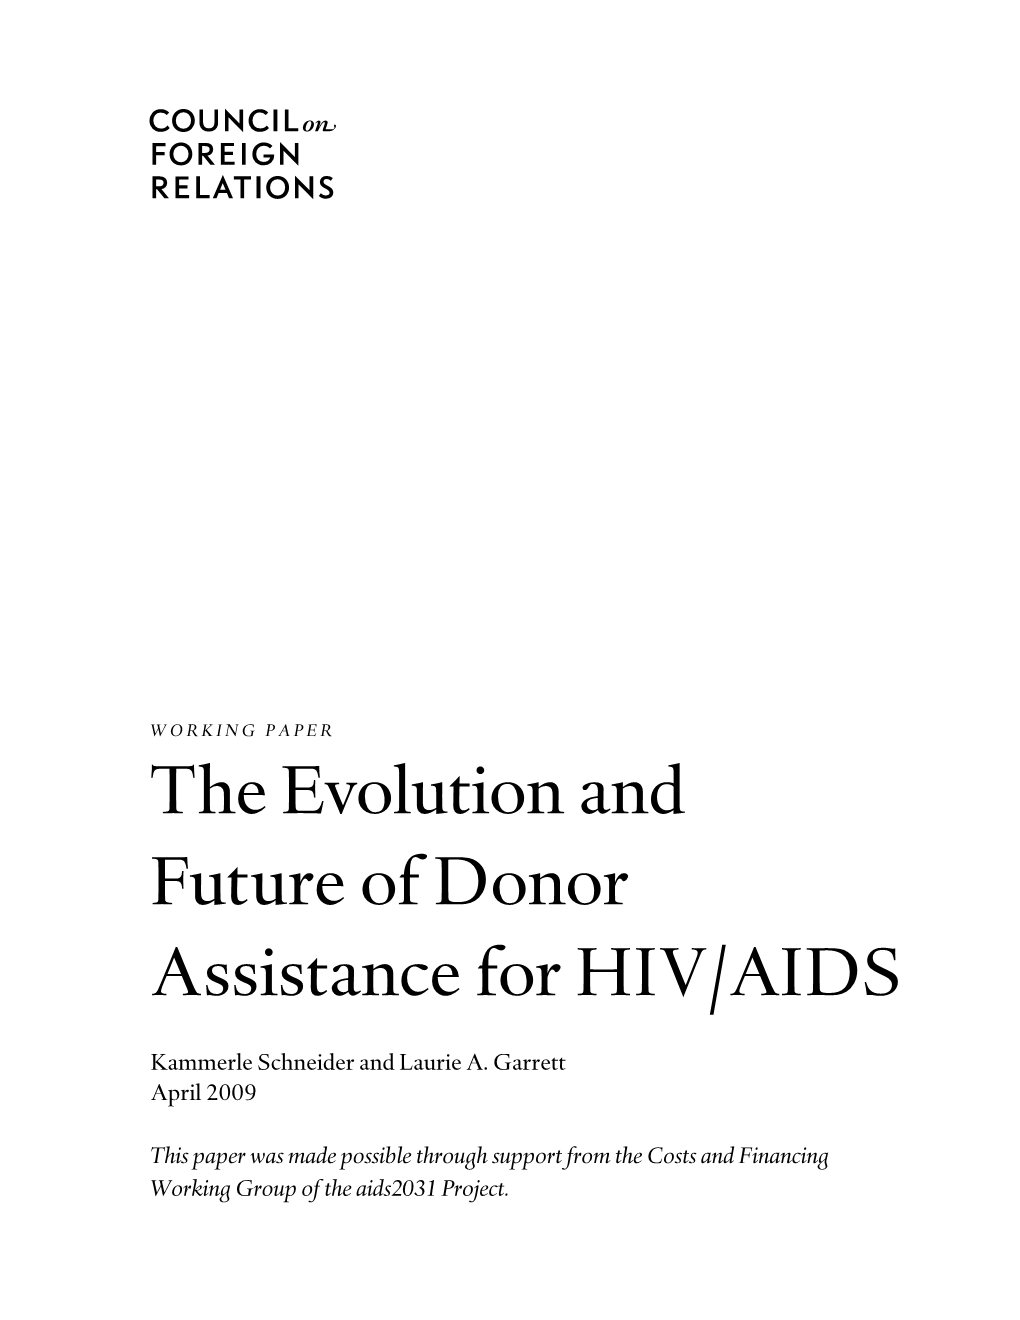 The Evolution and Future of Donor Assistance for HIV/AIDS